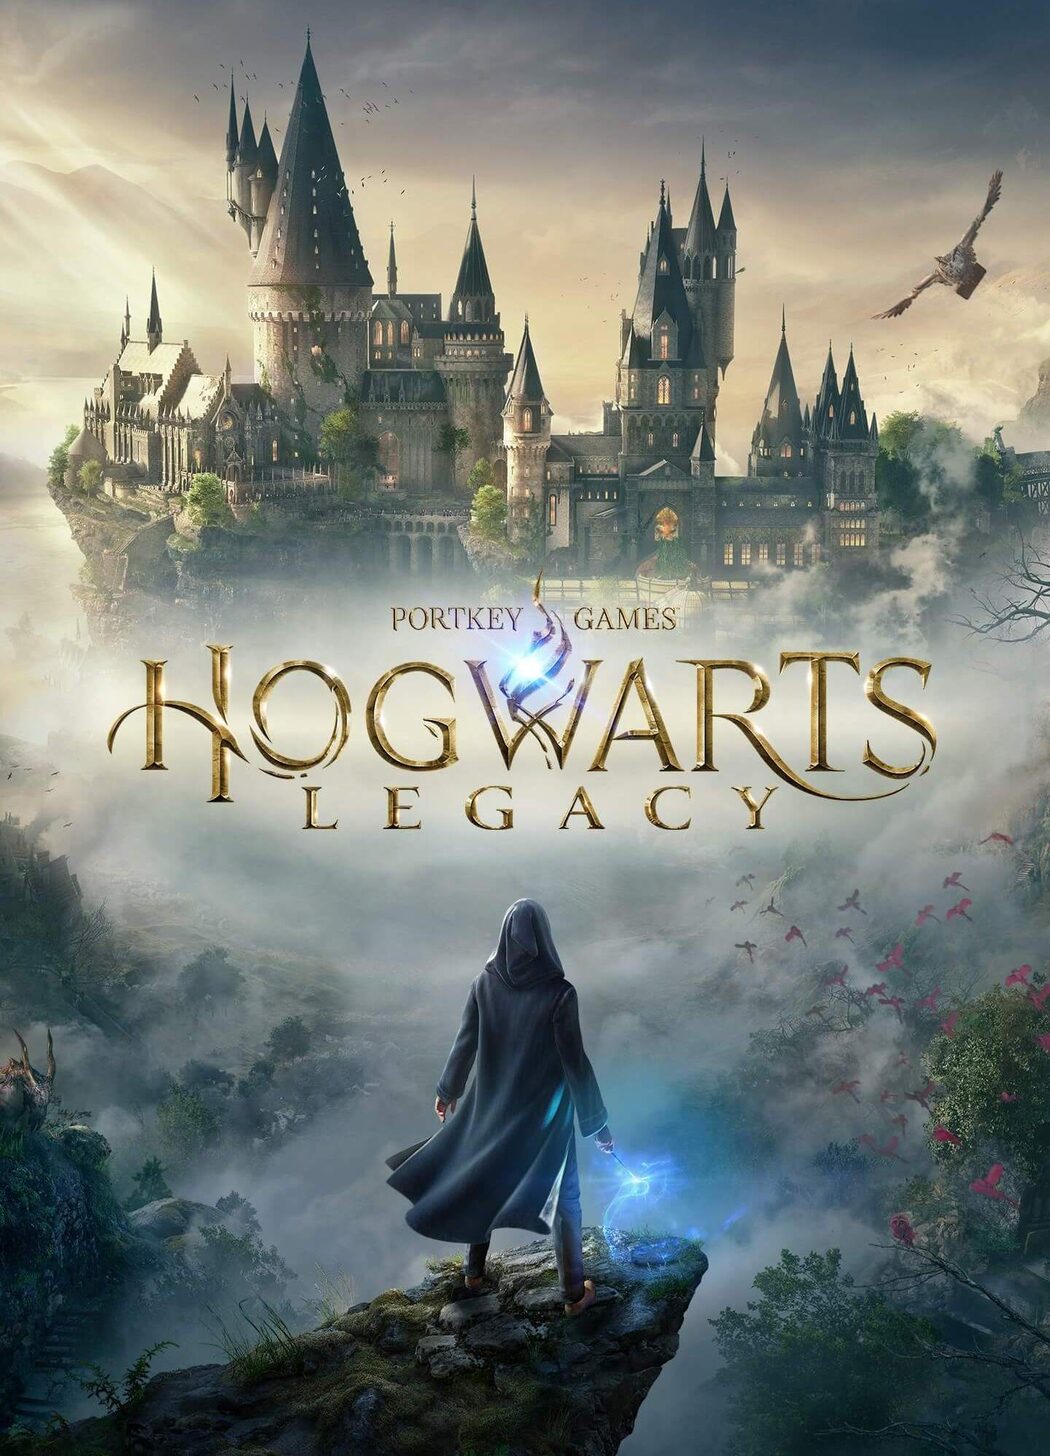 Eneba] Hogwarts Legacy Steam (PC) Key - Approx. $60 CAD all in w/ code -  Page 4 - RedFlagDeals.com Forums